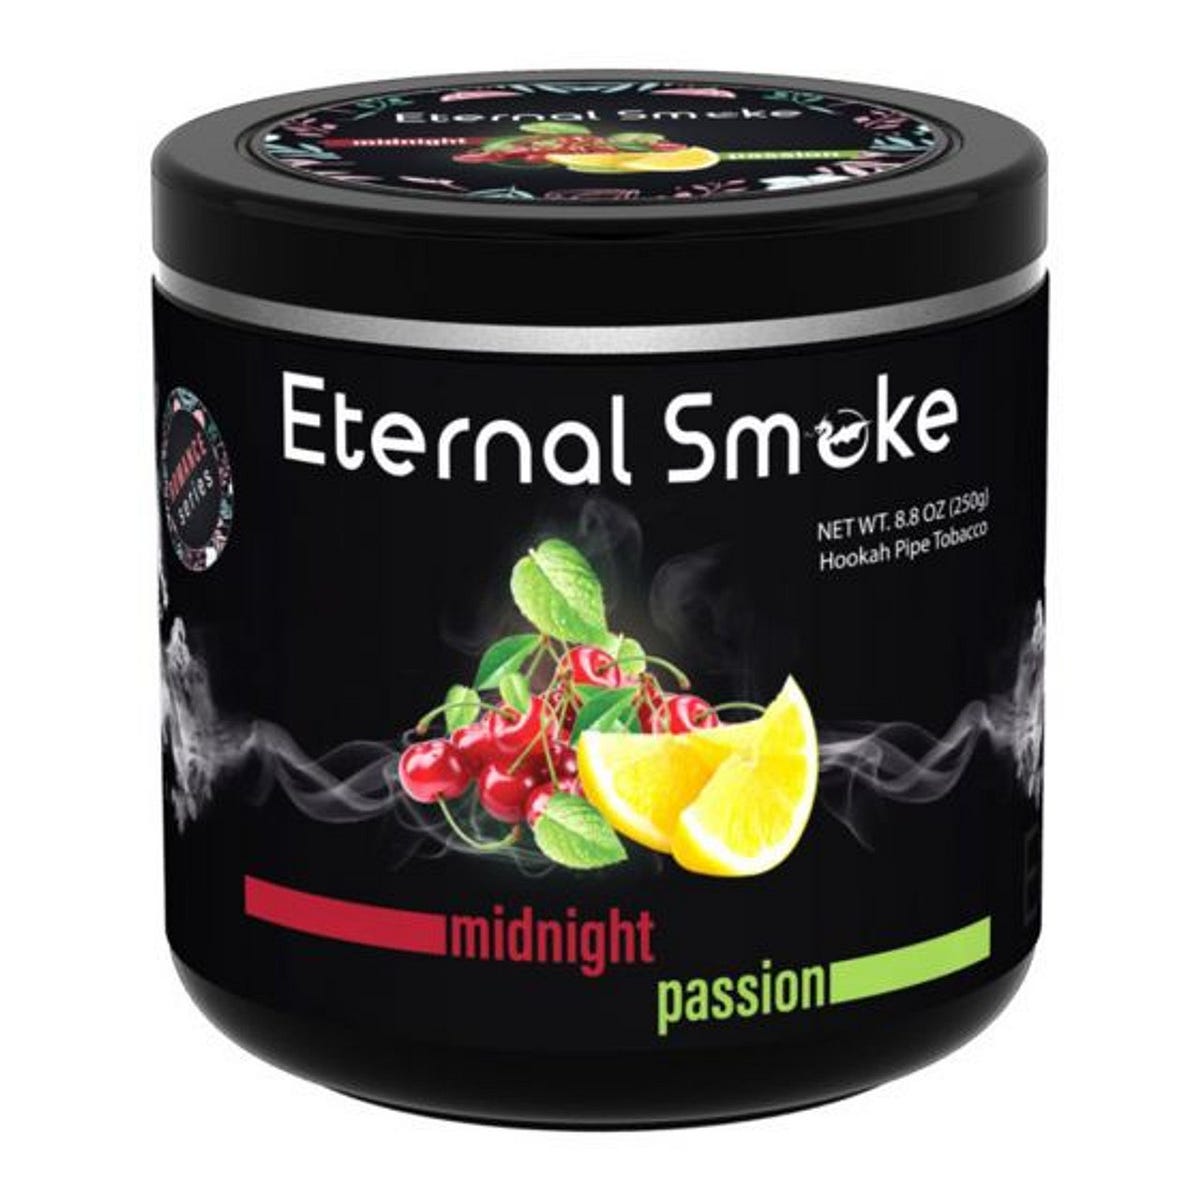 Buy shisha flavour Canada for your smoking enjoyment a bit better